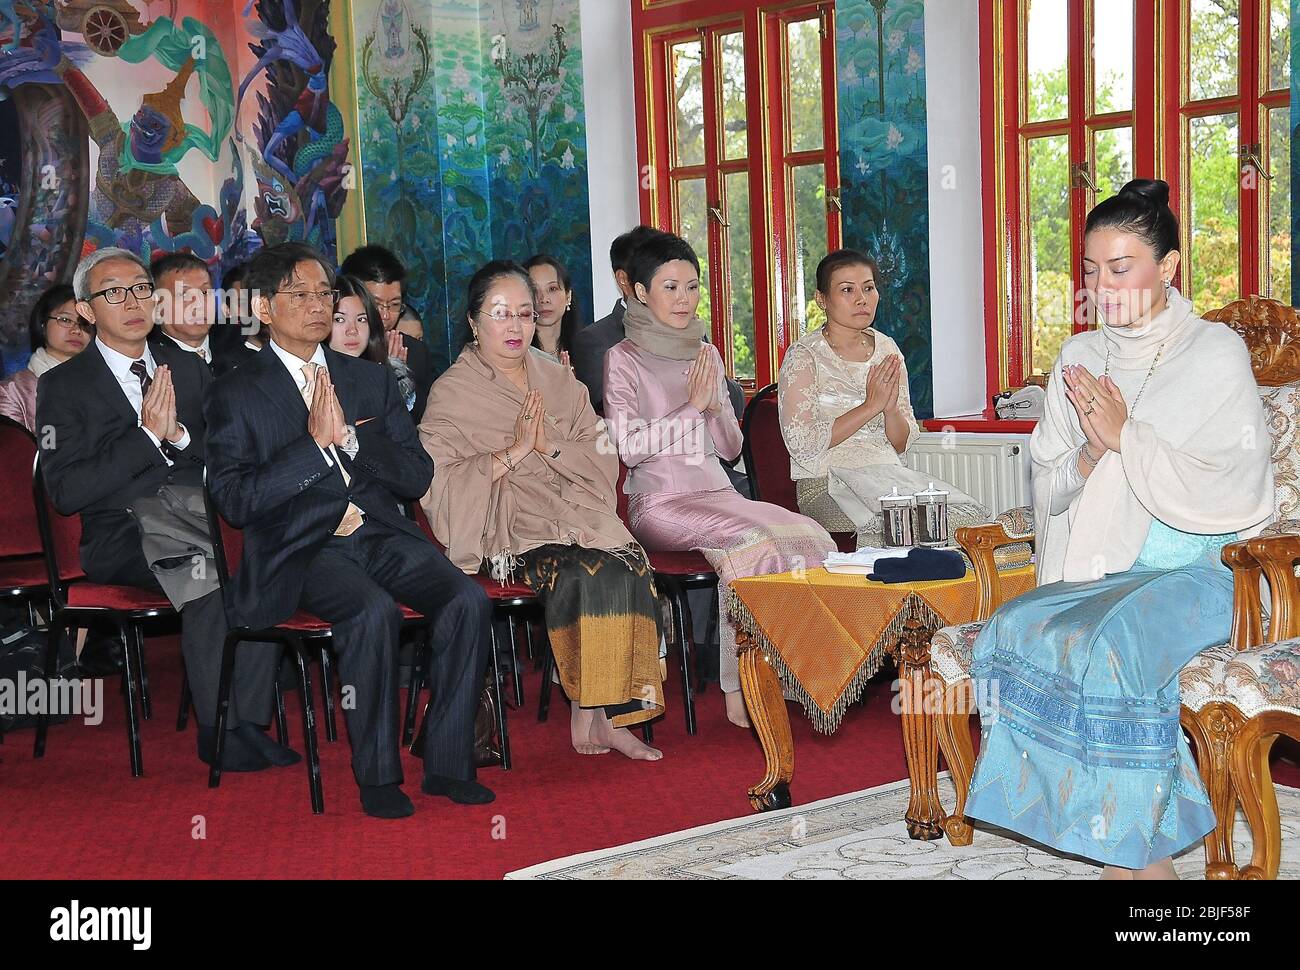 Prince Dipangkorn Rasmijoti was born on 29 April 2005 at Siriraj Hospitalin Bangkok.On 15 June 2005 king Bhumibol Adulyadej proclaimed the prince's name ,his Mother is Srirasmi Suwadee the kings third legal wife . She visited the UK and brought her son to a blessing ceremony at the Buddhapadipa Thai Temple in Wimbledon , London ,UK and after the ceremony went to the Temple hall to meet the children and the teachers of the Thai School in Wimbledon .She presented food to the monks and meet the children and there teachers . Stock Photo